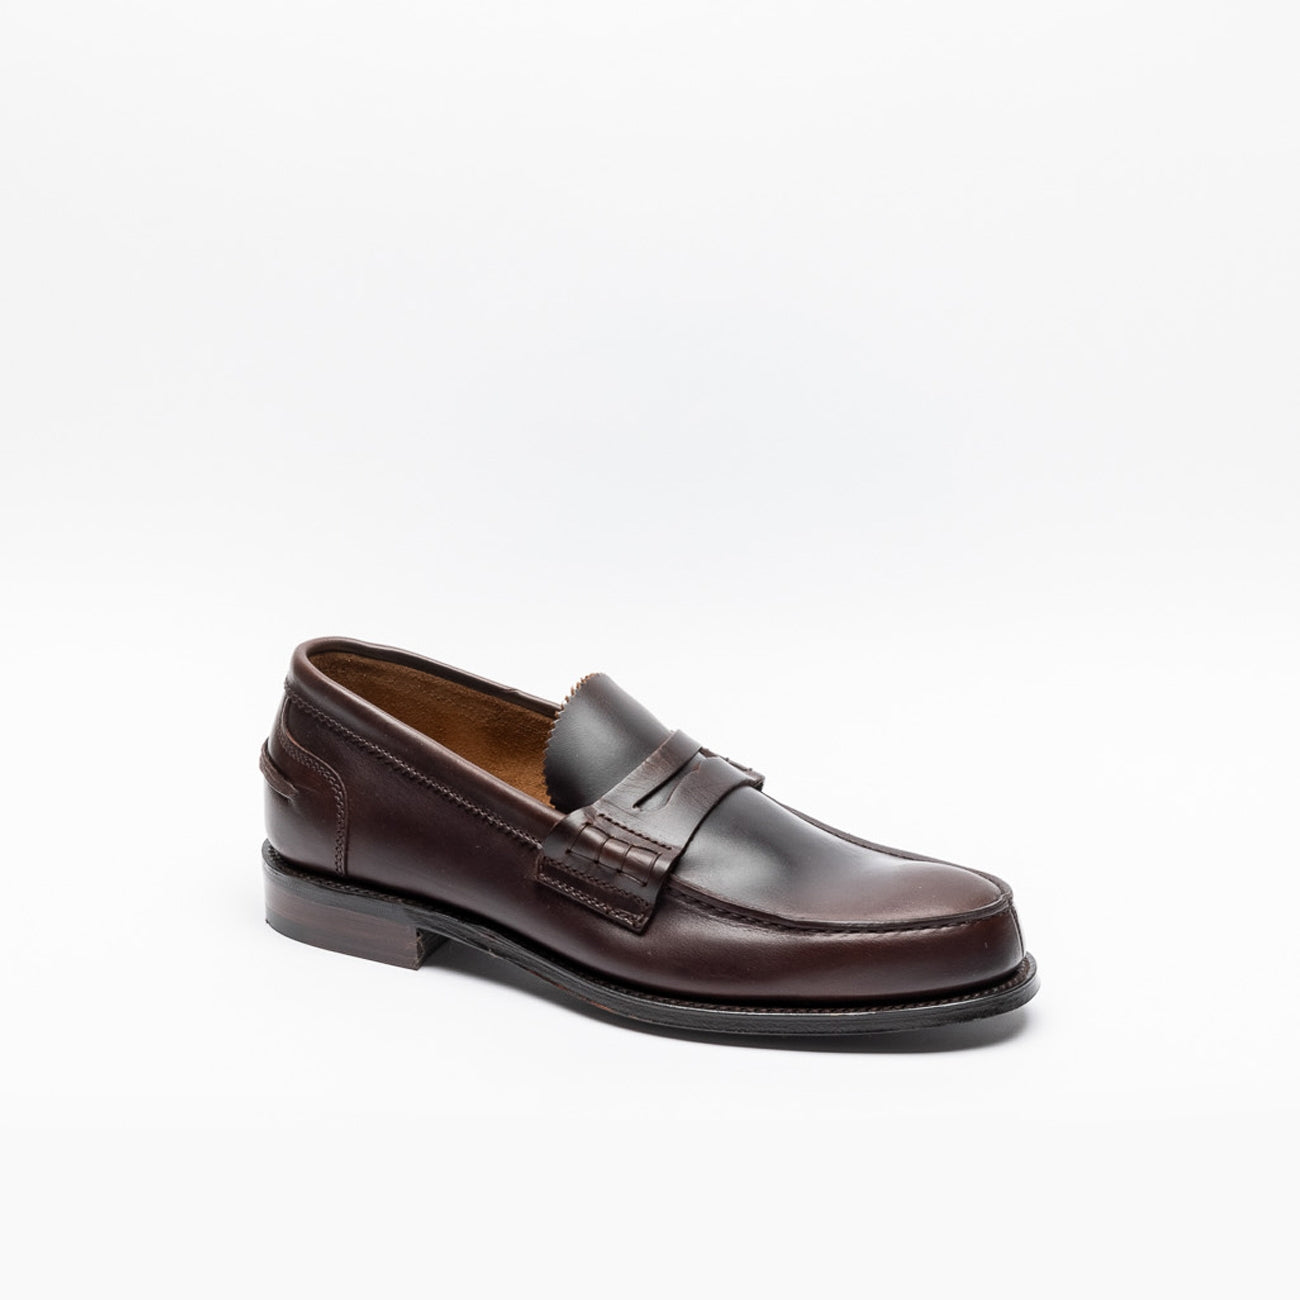 Cheaney Joseph & Sons brown oxford pull up calf penny loafer